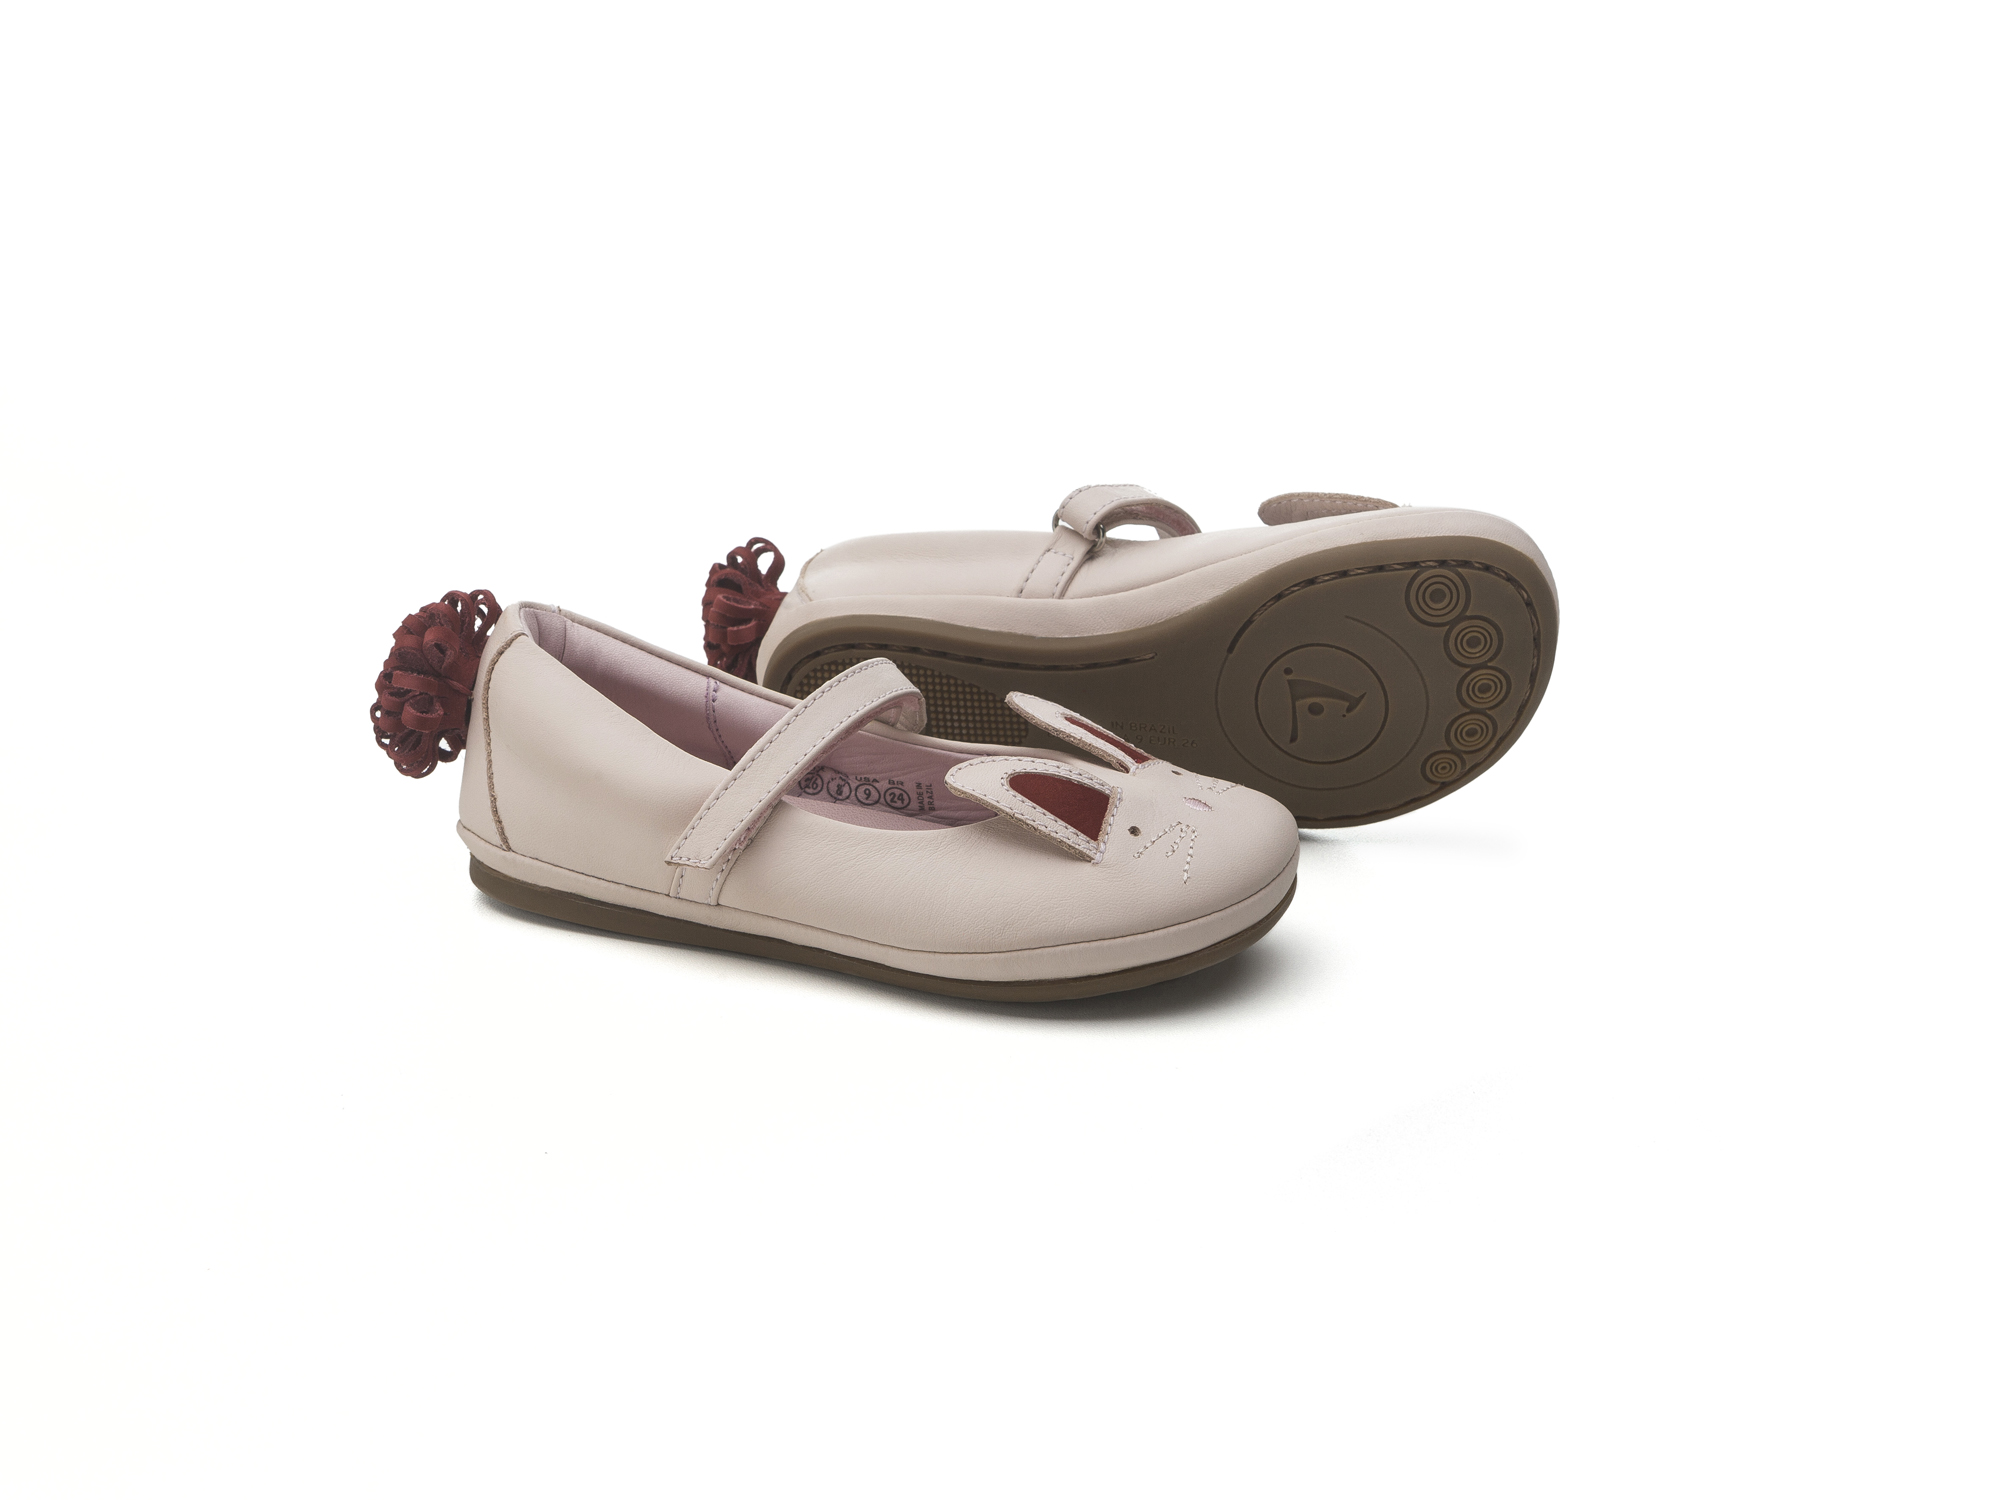 UP & GO Mary Janes for Girls Little Bunny | Tip Toey Joey - Australia - 1